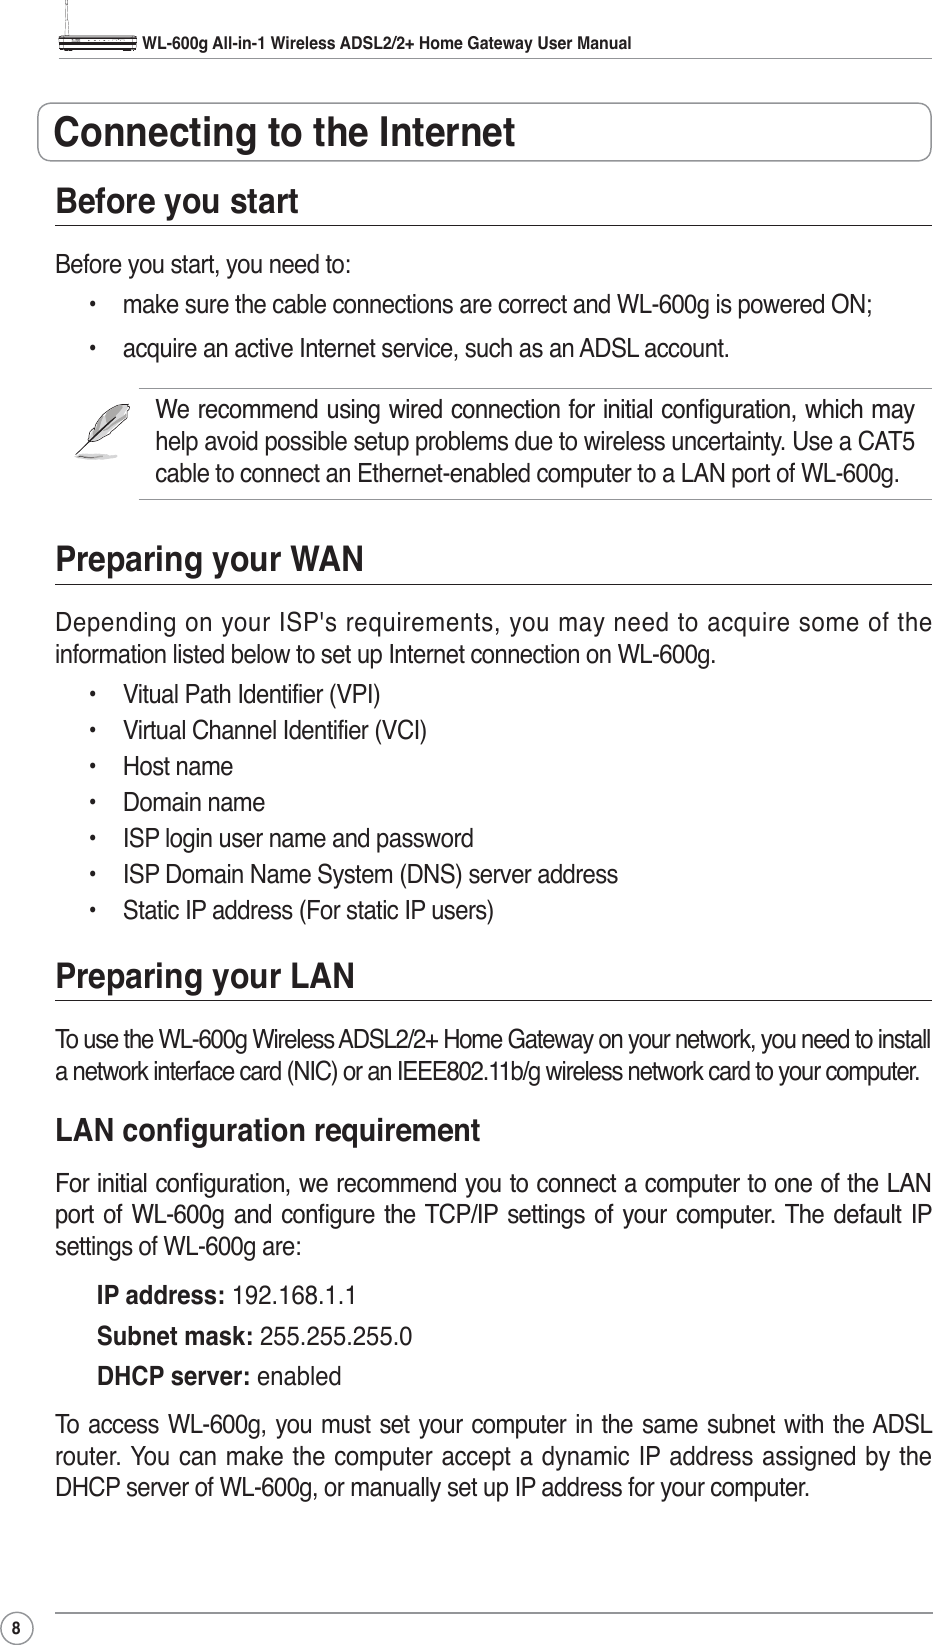 WL-600g All-in-1 Wireless ADSL2/2+ Home Gateway User Manual8Before you startBefore you start, you need to:• make sure the cable connections are correct and WL-600g is powered ON;• acquire an active Internet service, such as an ADSL account.:HUHFRPPHQGXVLQJZLUHGFRQQHFWLRQIRULQLWLDOFRQÀJXUDWLRQZKLFKPD\help avoid possible setup problems due to wireless uncertainty. Use a CAT5 cable to connect an Ethernet-enabled computer to a LAN port of WL-600g. Preparing your WANDepending on your ISP&apos;s requirements, you may need to acquire some of the information listed below to set up Internet connection on WL-600g.• Vitual Path Identifier (VPI)• Virtual Channel Identifier (VCI)• Host name• Domain name• ISP login user name and password• ISP Domain Name System (DNS) server address• Static IP address (For static IP users)Preparing your LANTo use the WL-600g Wireless ADSL2/2+ Home Gateway on your network, you need to install a network interface card (NIC) or an IEEE802.11b/g wireless network card to your computer./$1FRQÀJXUDWLRQUHTXLUHPHQW)RULQLWLDOFRQÀJXUDWLRQZHUHFRPPHQG\RXWRFRQQHFWDFRPSXWHUWRRQHRIWKH/$1SRUW RI :/J DQG FRQÀJXUH WKH 7&amp;3,3 VHWWLQJV RI \RXU FRPSXWHU 7KH GHIDXOW ,3settings of WL-600g are:IP address: 192.168.1.1Subnet mask: 255.255.255.0DHCP server: enabledTo access WL-600g, you must set your computer in the same subnet with the ADSL router. You can make the computer accept a dynamic IP address assigned by the DHCP server of WL-600g, or manually set up IP address for your computer.Connecting to the Internet